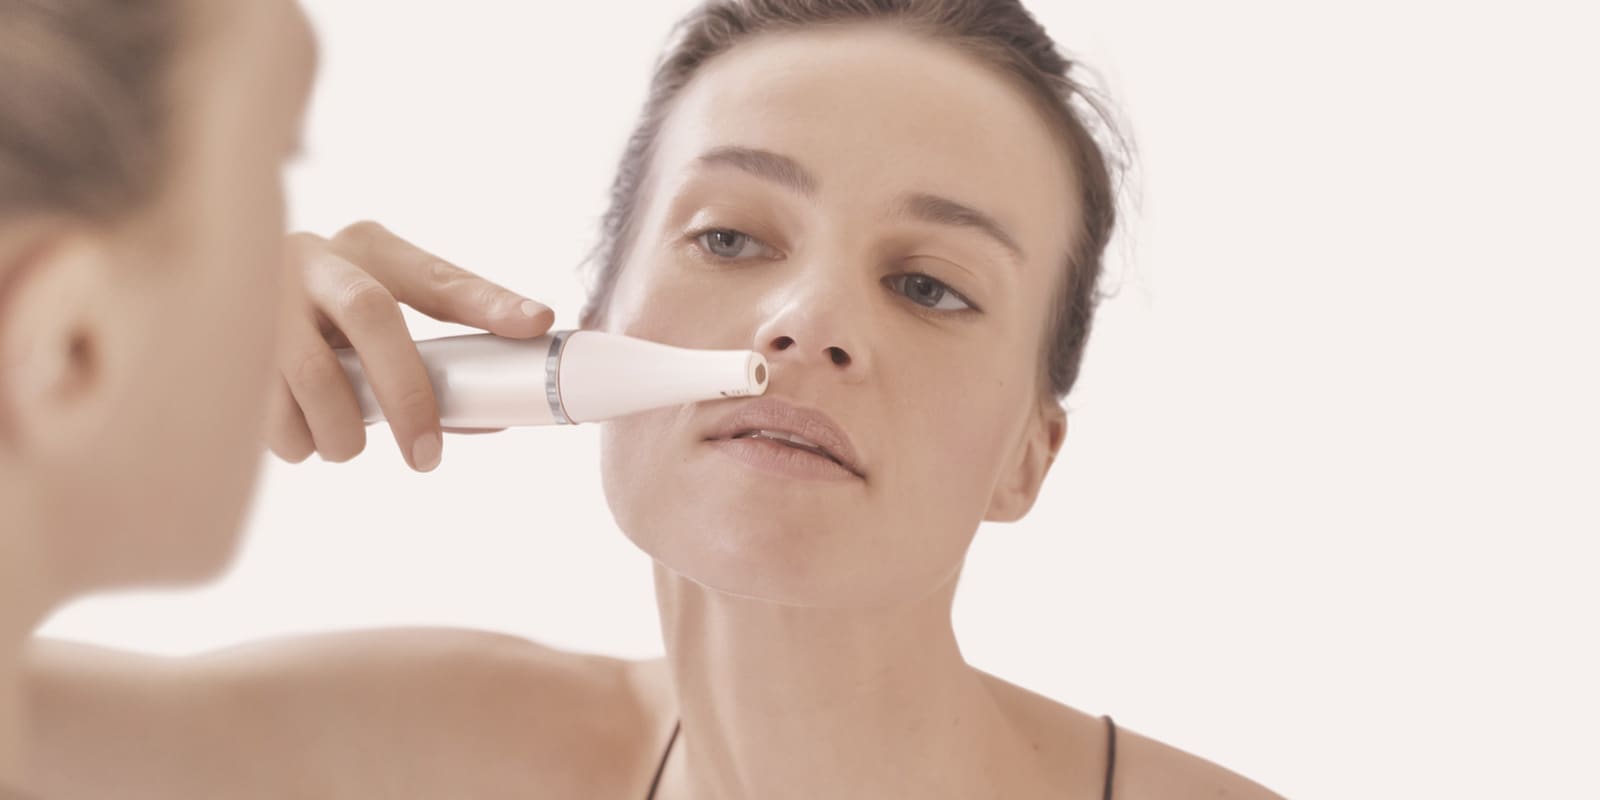 How to Remove Facial Hair For Women: Top Tips